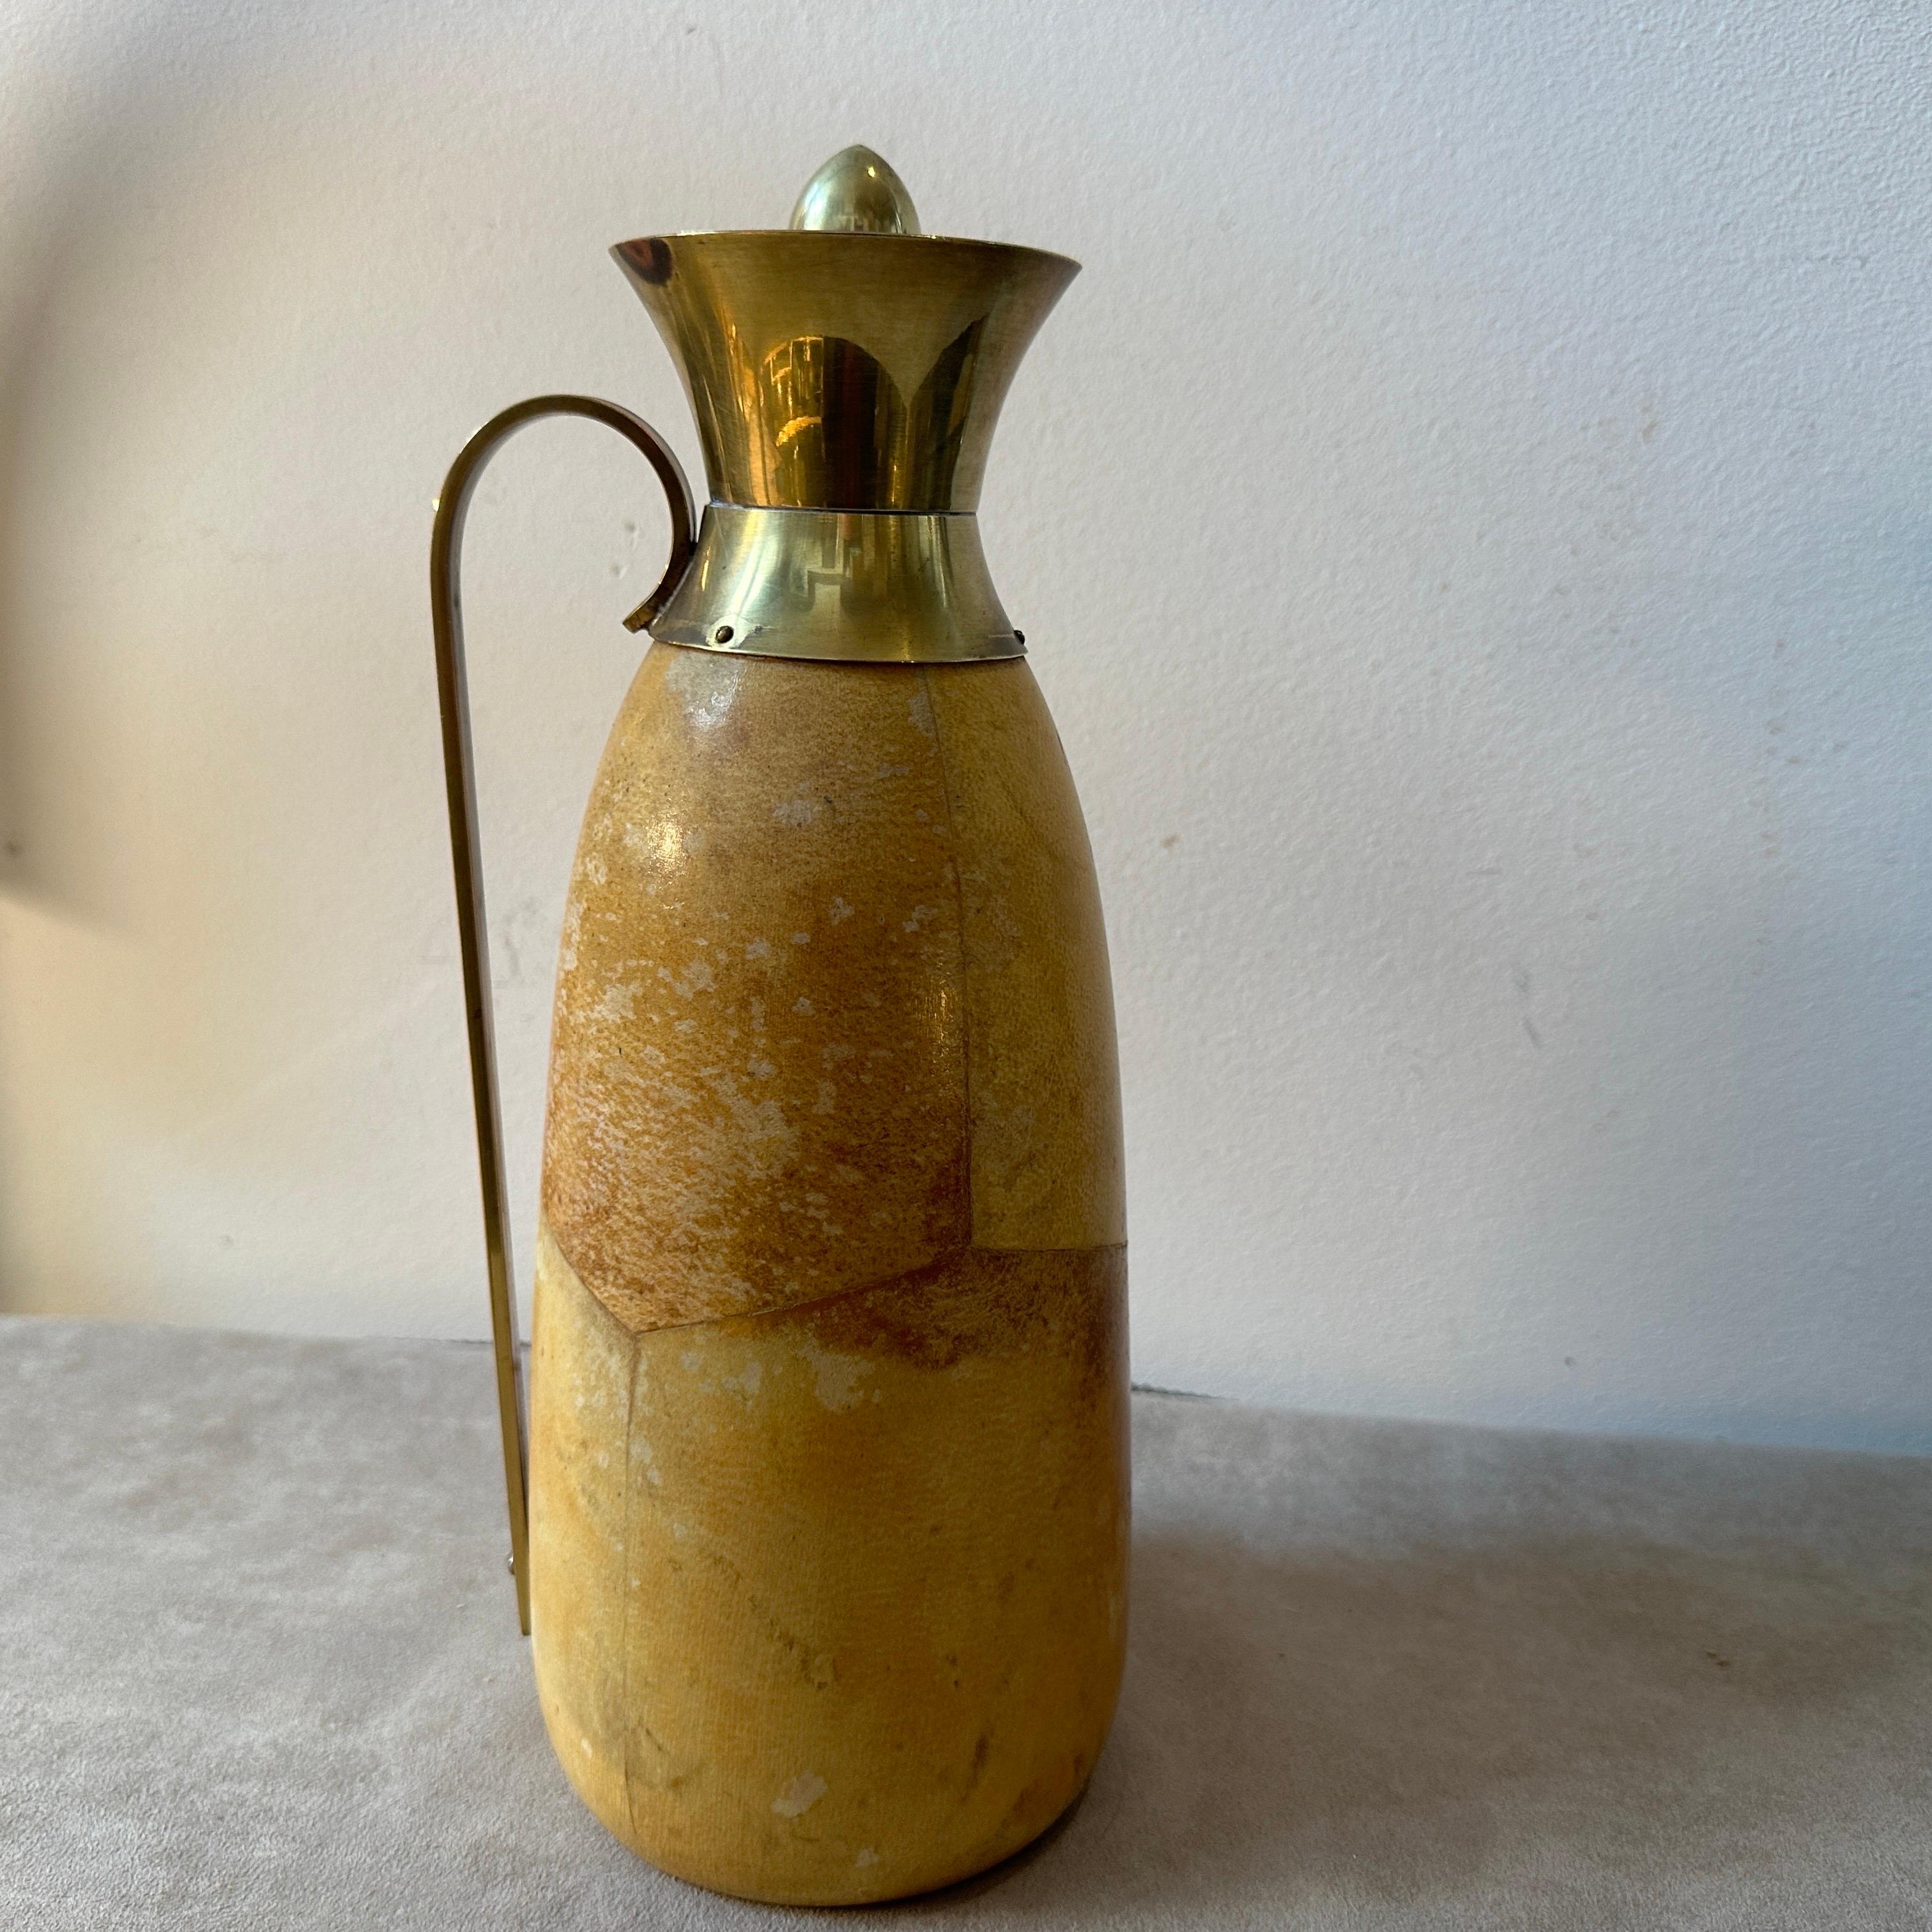 1950s Mid-Century Modern Goatskin and Brass Thermos Carafe by Aldo Tura For Sale 4